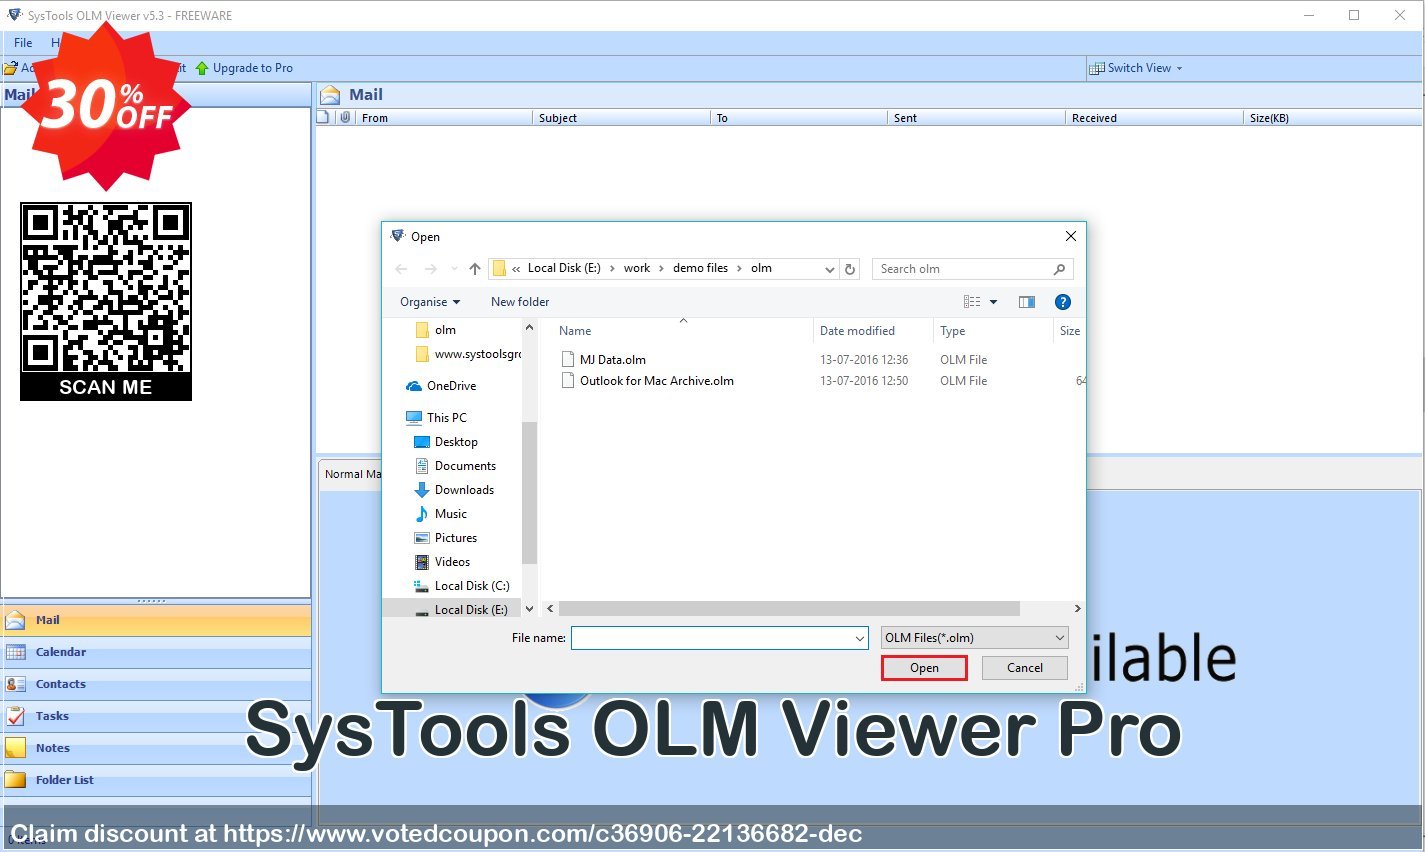 SysTools OLM Viewer Pro voted-on promotion codes